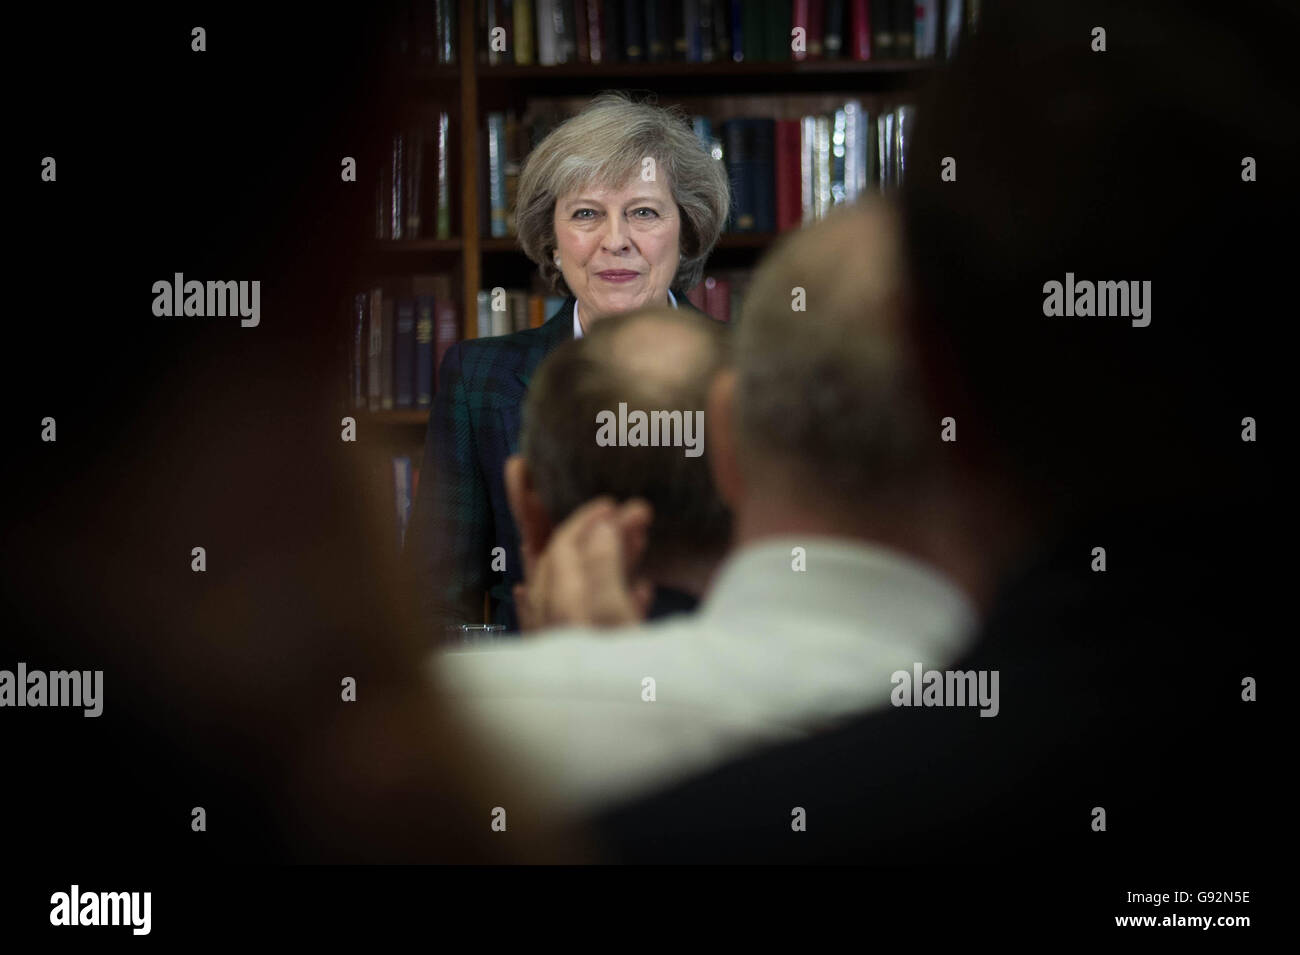 Home Secretary Theresa May launches her Conservative leadership campaign at RUSI in London, as she formally enters the race to succeed David Cameron in Downing Street. Stock Photo